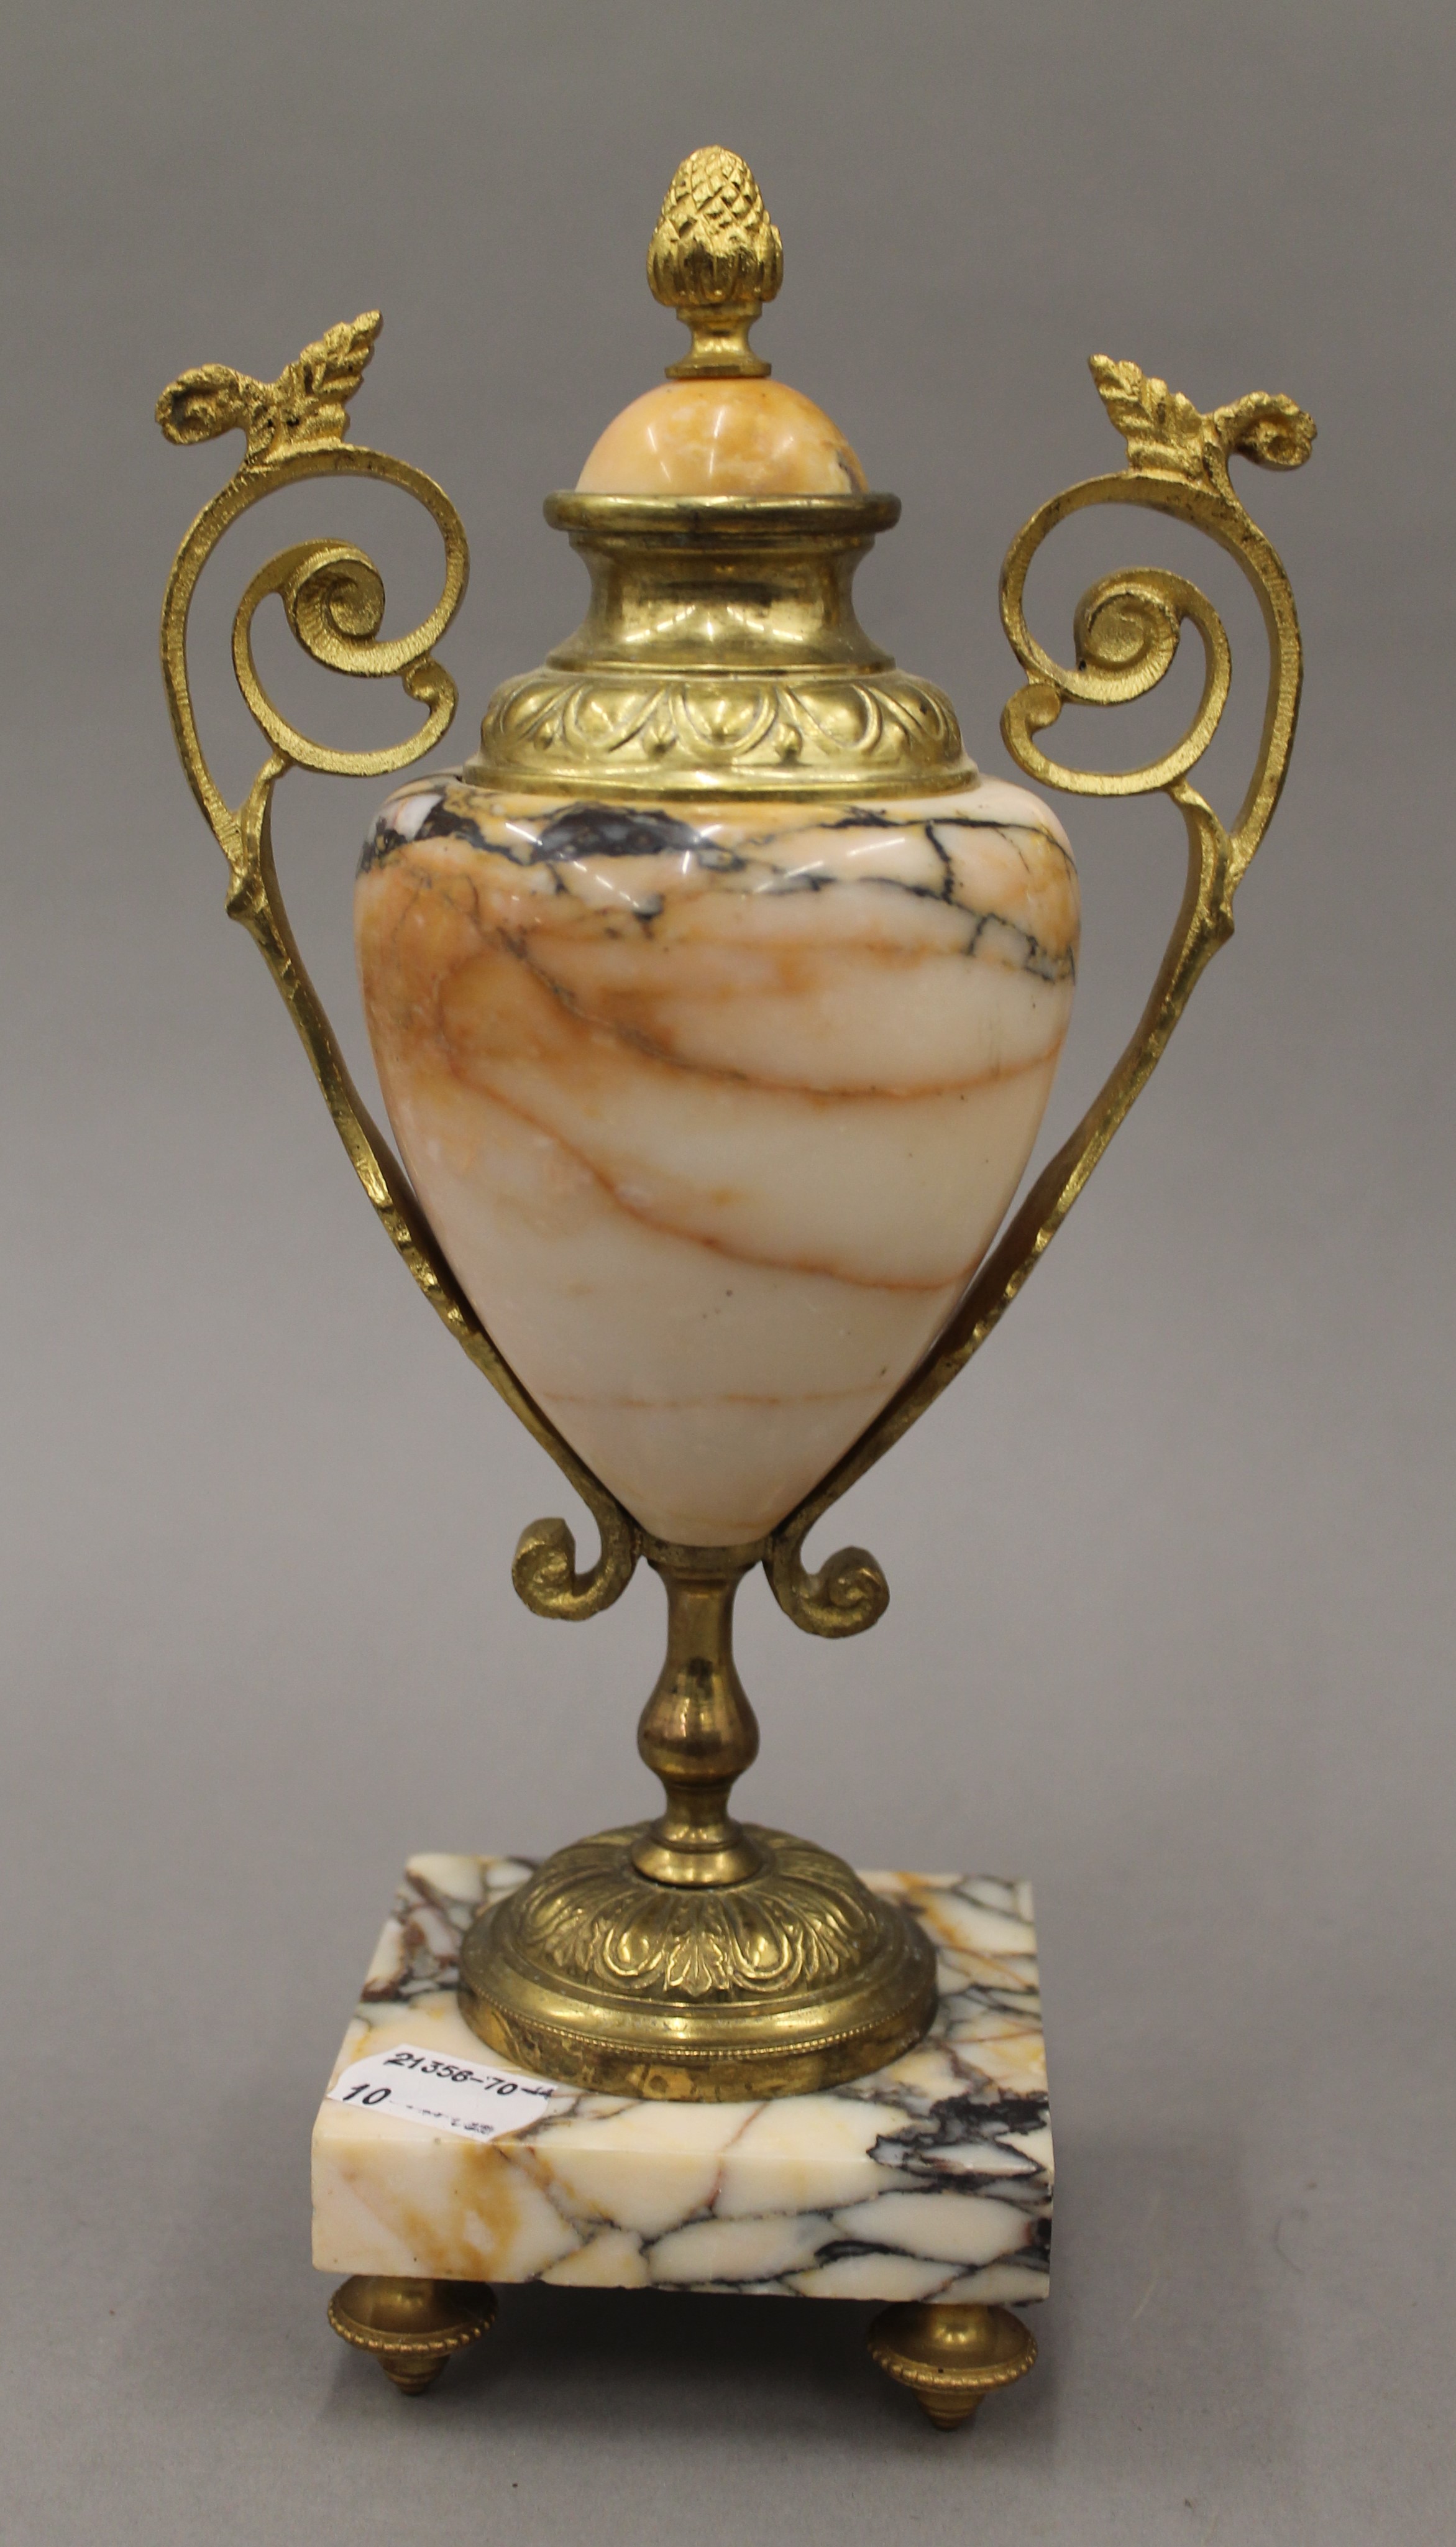 A marble and ormolu clock garniture with pendulum and key, with enamel dial and striking movement. - Image 10 of 14